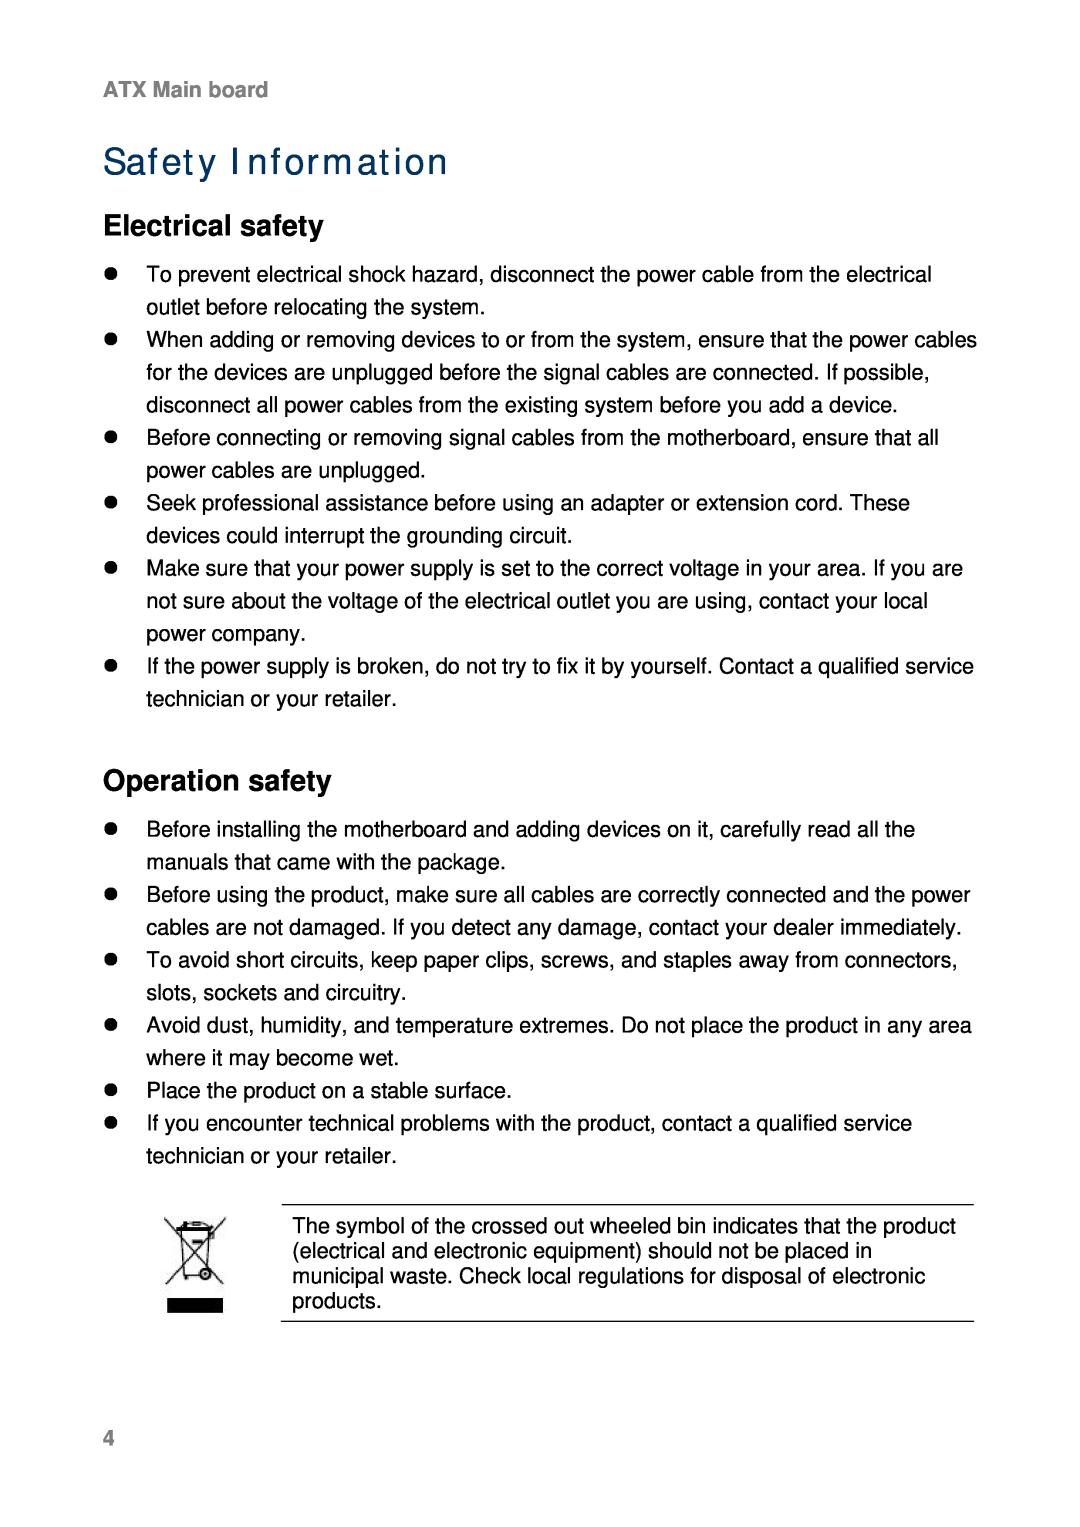 Intel AX965Q user manual Safety Information, Electrical safety, Operation safety, ATX Main board 